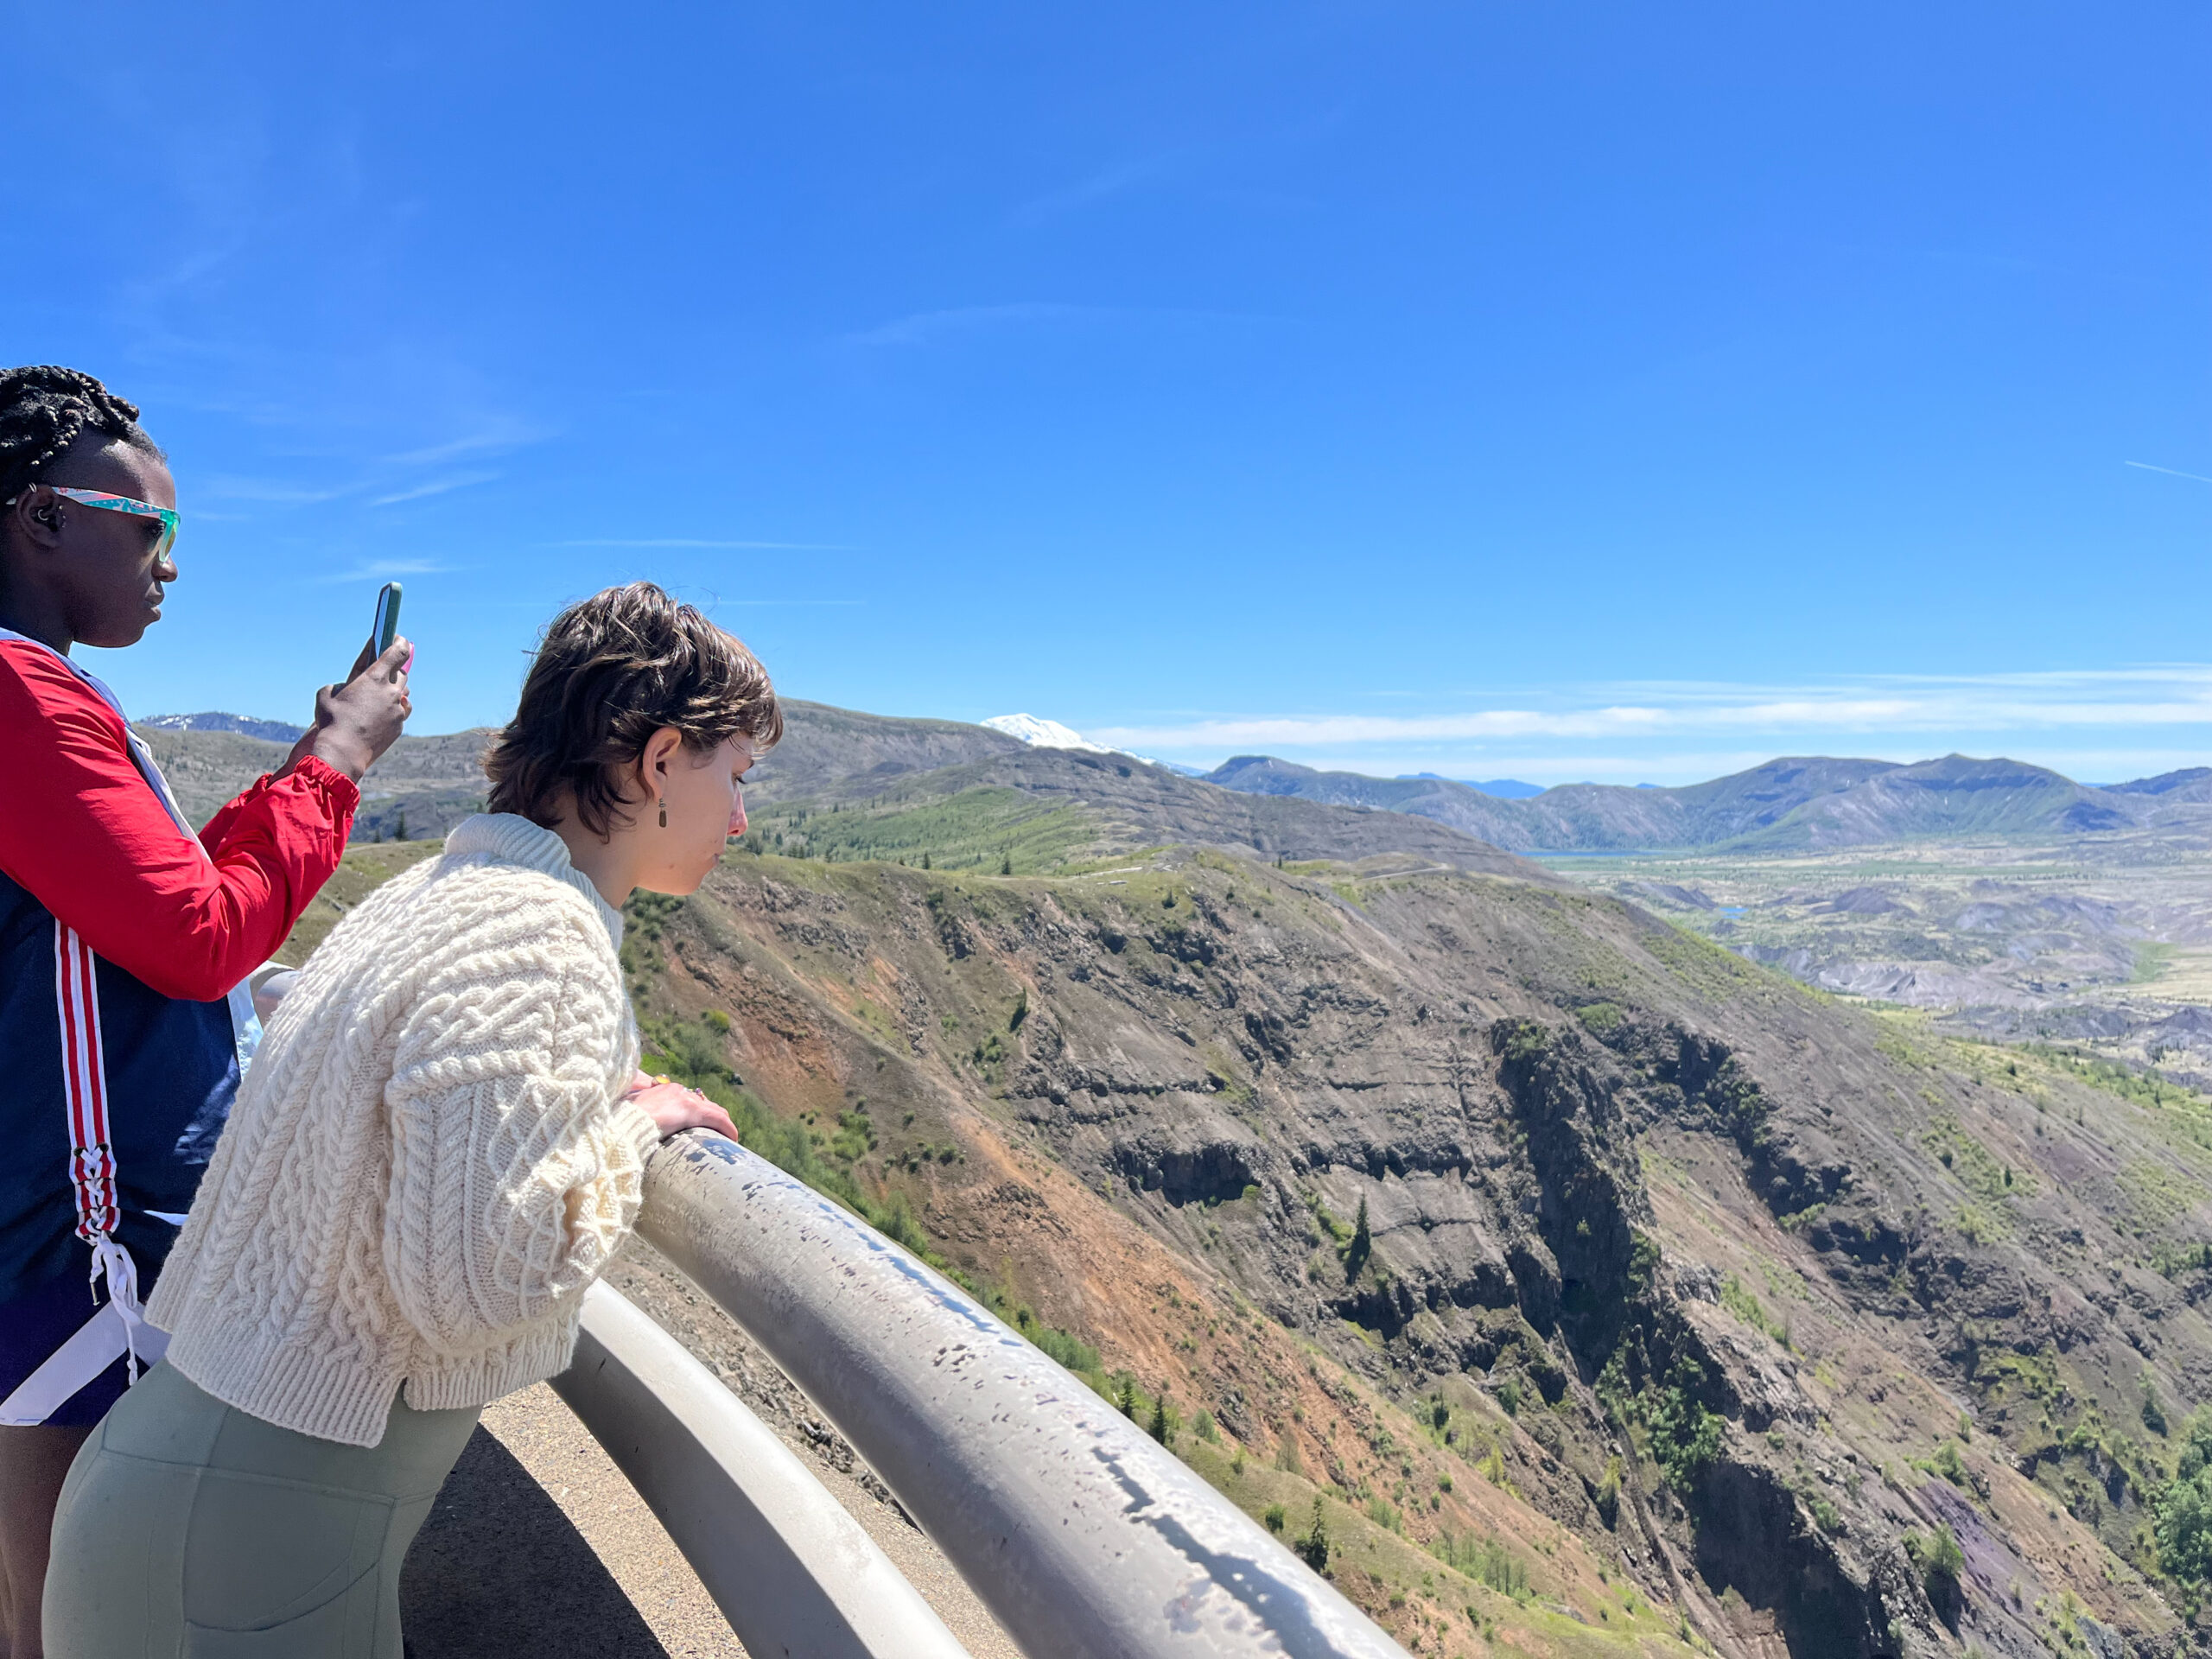 Anika Knight snaps a photo while 2022 RESESS Satellite Intern Angie Bonanno looks over the railing at Mount St. Helens on the RESESS Satellite group from the University of Washington field trip to Mt St Helens (Photo: Lucia Bellino/UNAVCO)